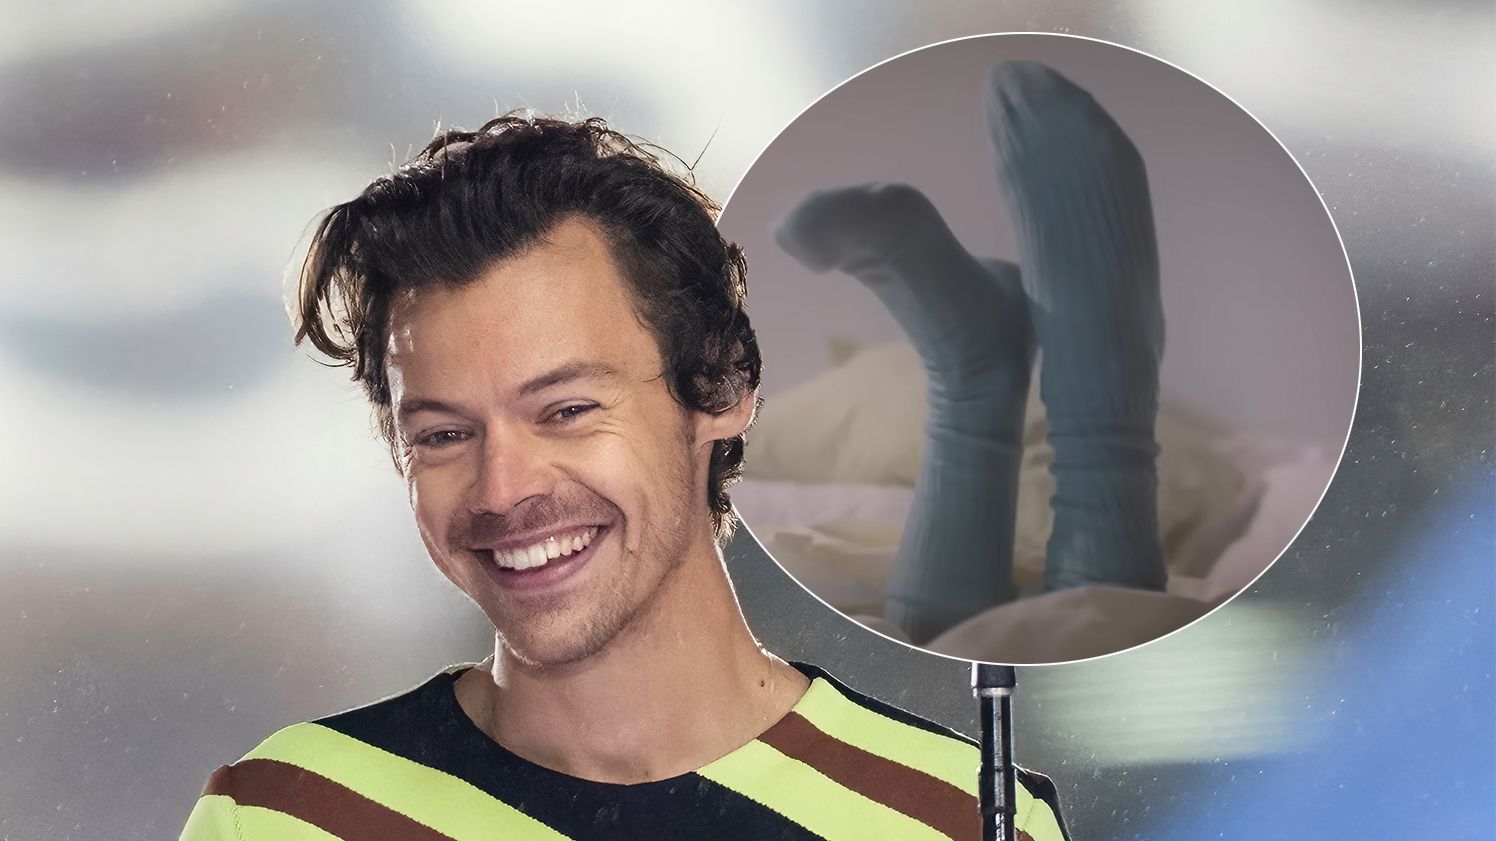 One Direction's Harry Styles looks upbeat for Made in the AM promo